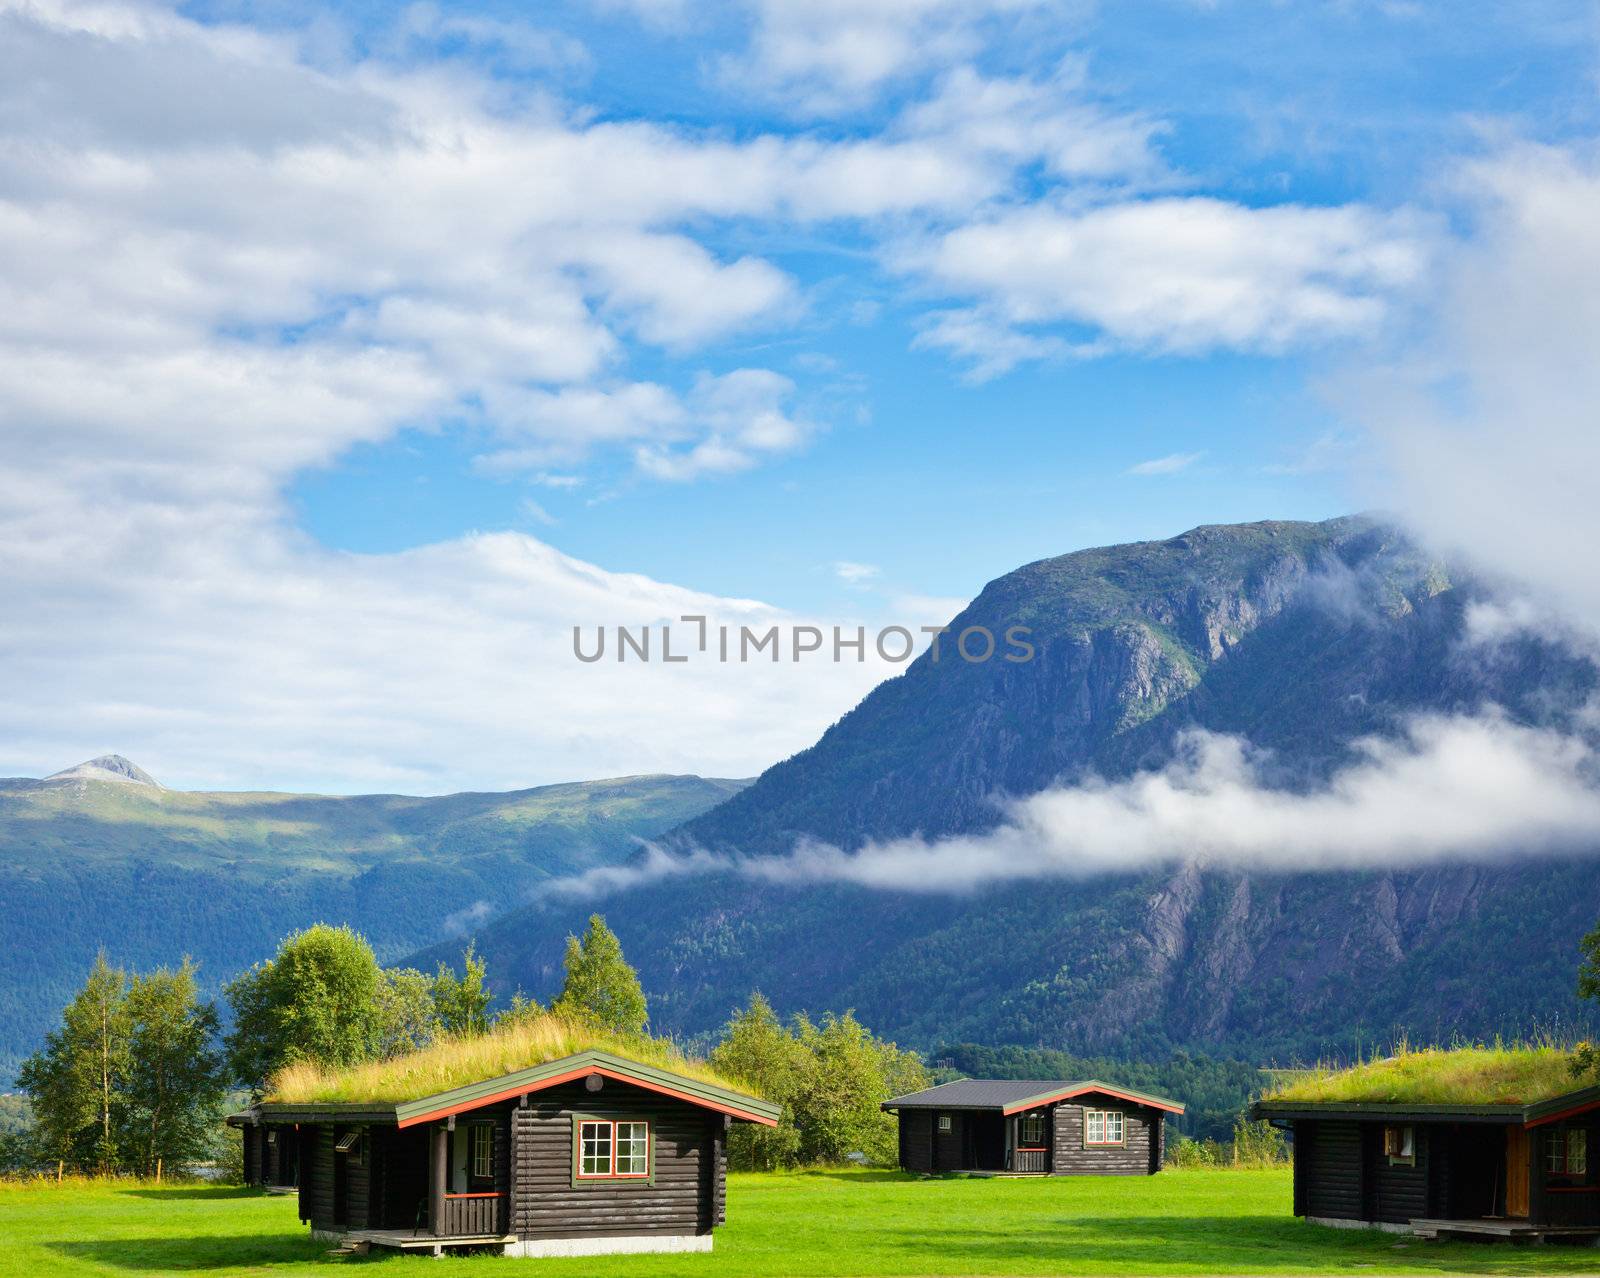 Camping cabins in Scandinavia by naumoid